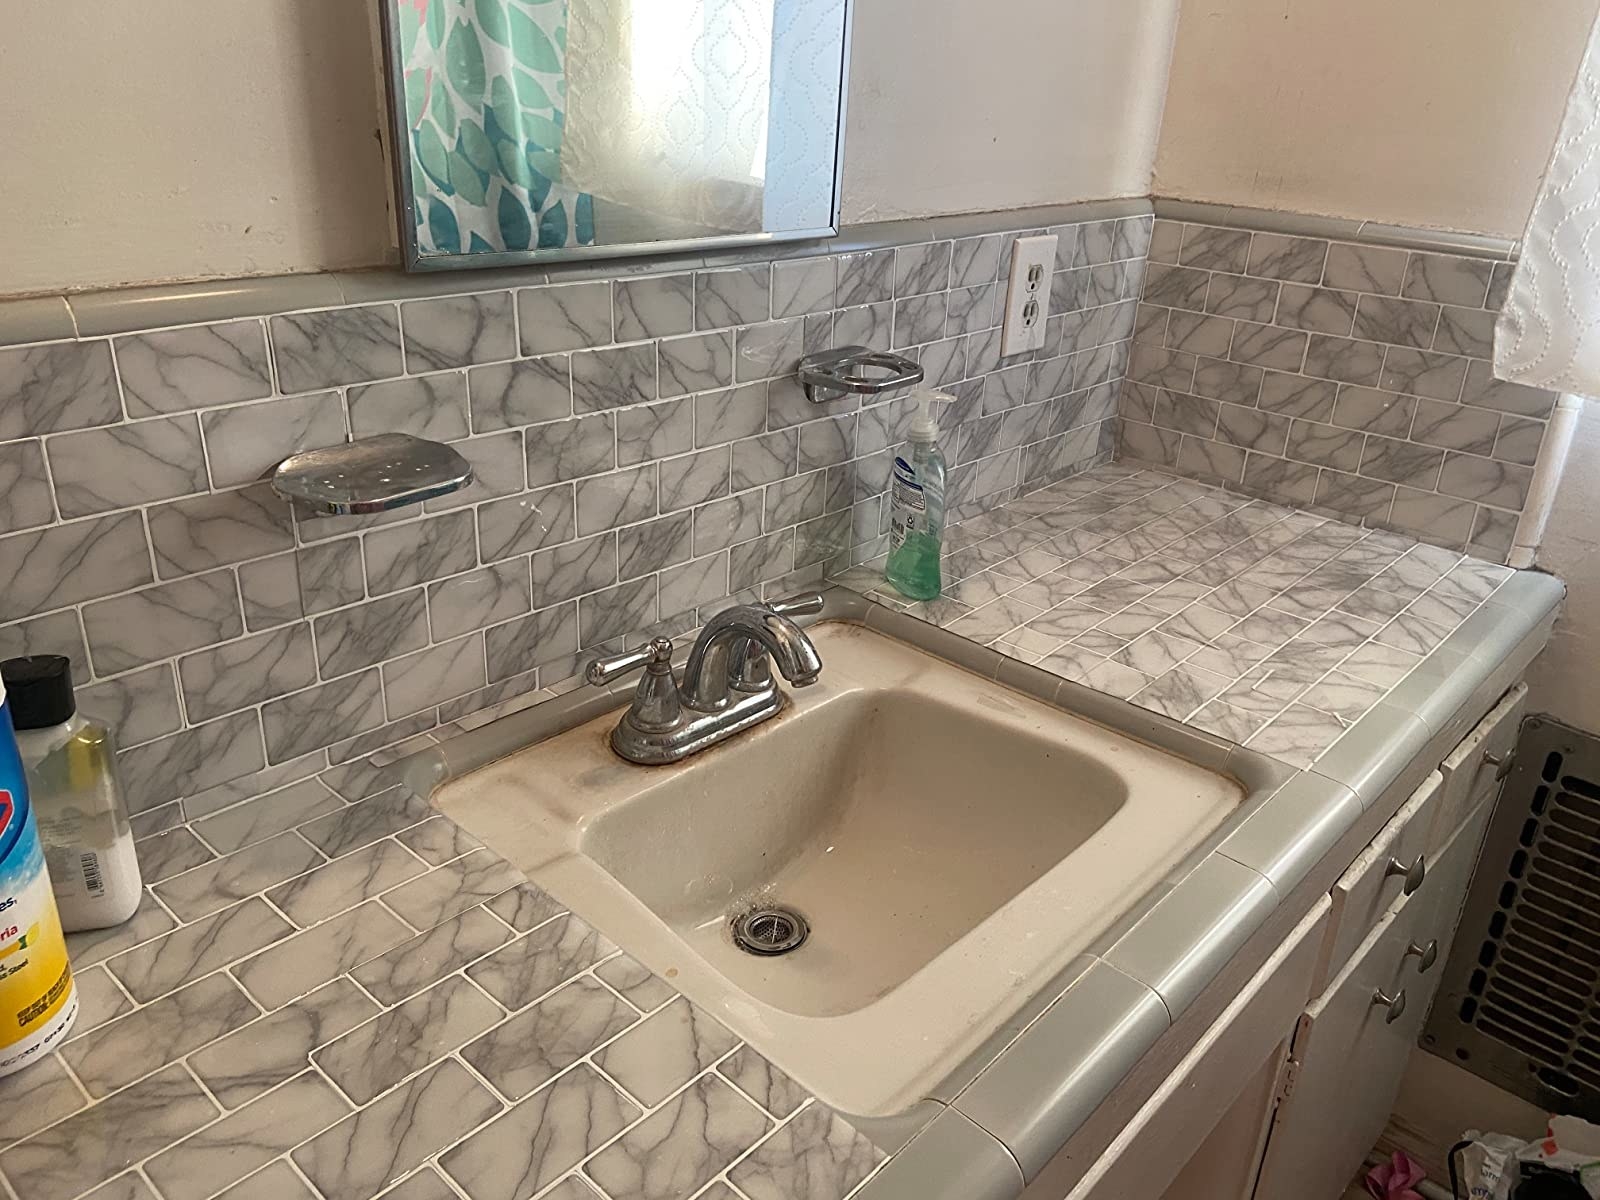 Reviewer's bathroom vanity and sink are shown with the peel and stick tiles